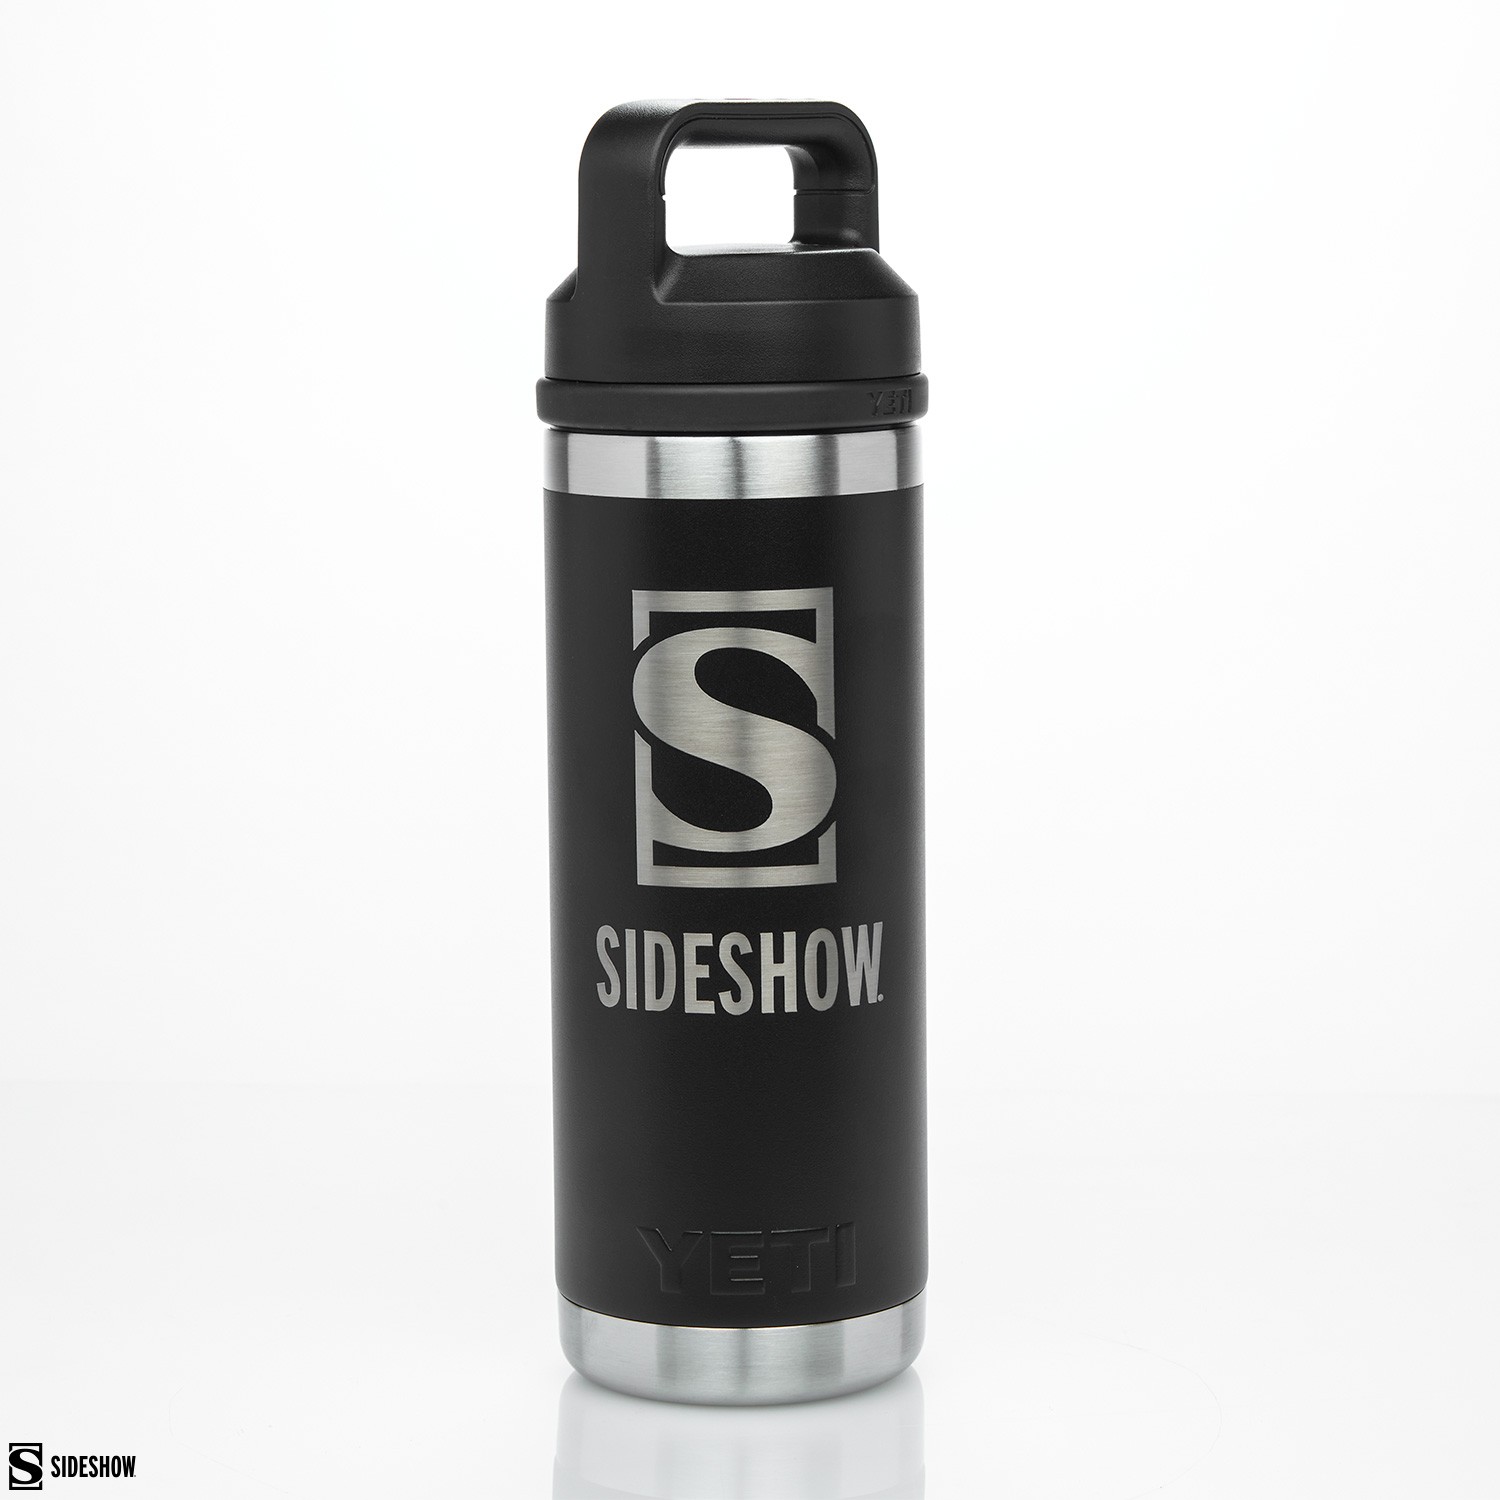 https://www.sideshow.com/cdn-cgi/image/quality=90,f=auto/https://www.sideshow.com/storage/product-images/502320/sideshow-x-yeti-water-bottle_sideshow-collectibles_gallery_6557a9ff45261.jpg